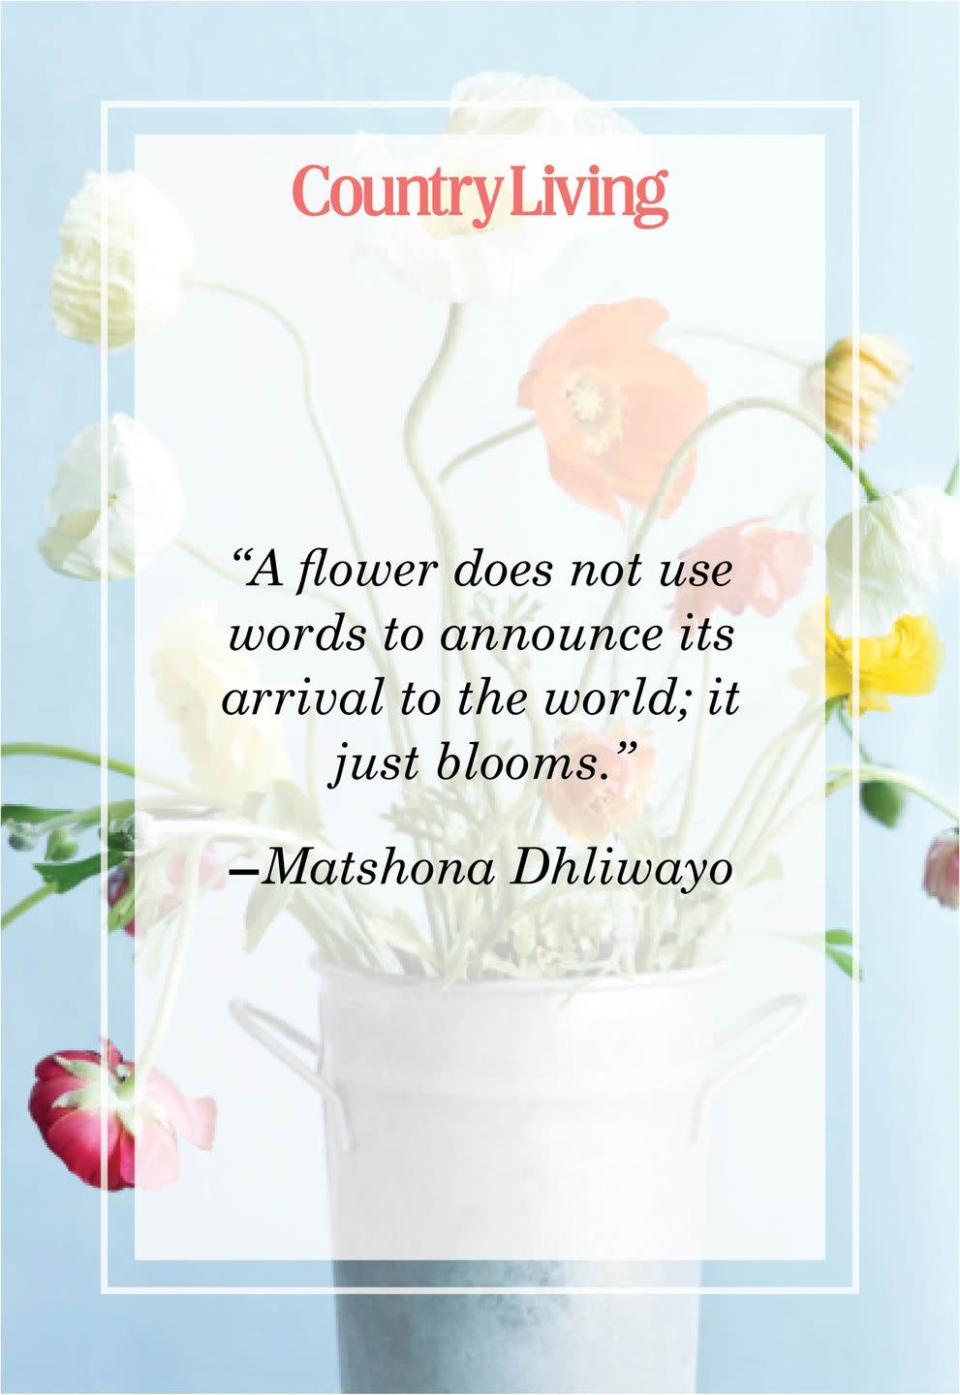 <p>“A flower does not use words to announce its arrival to the world; it just blooms." </p>